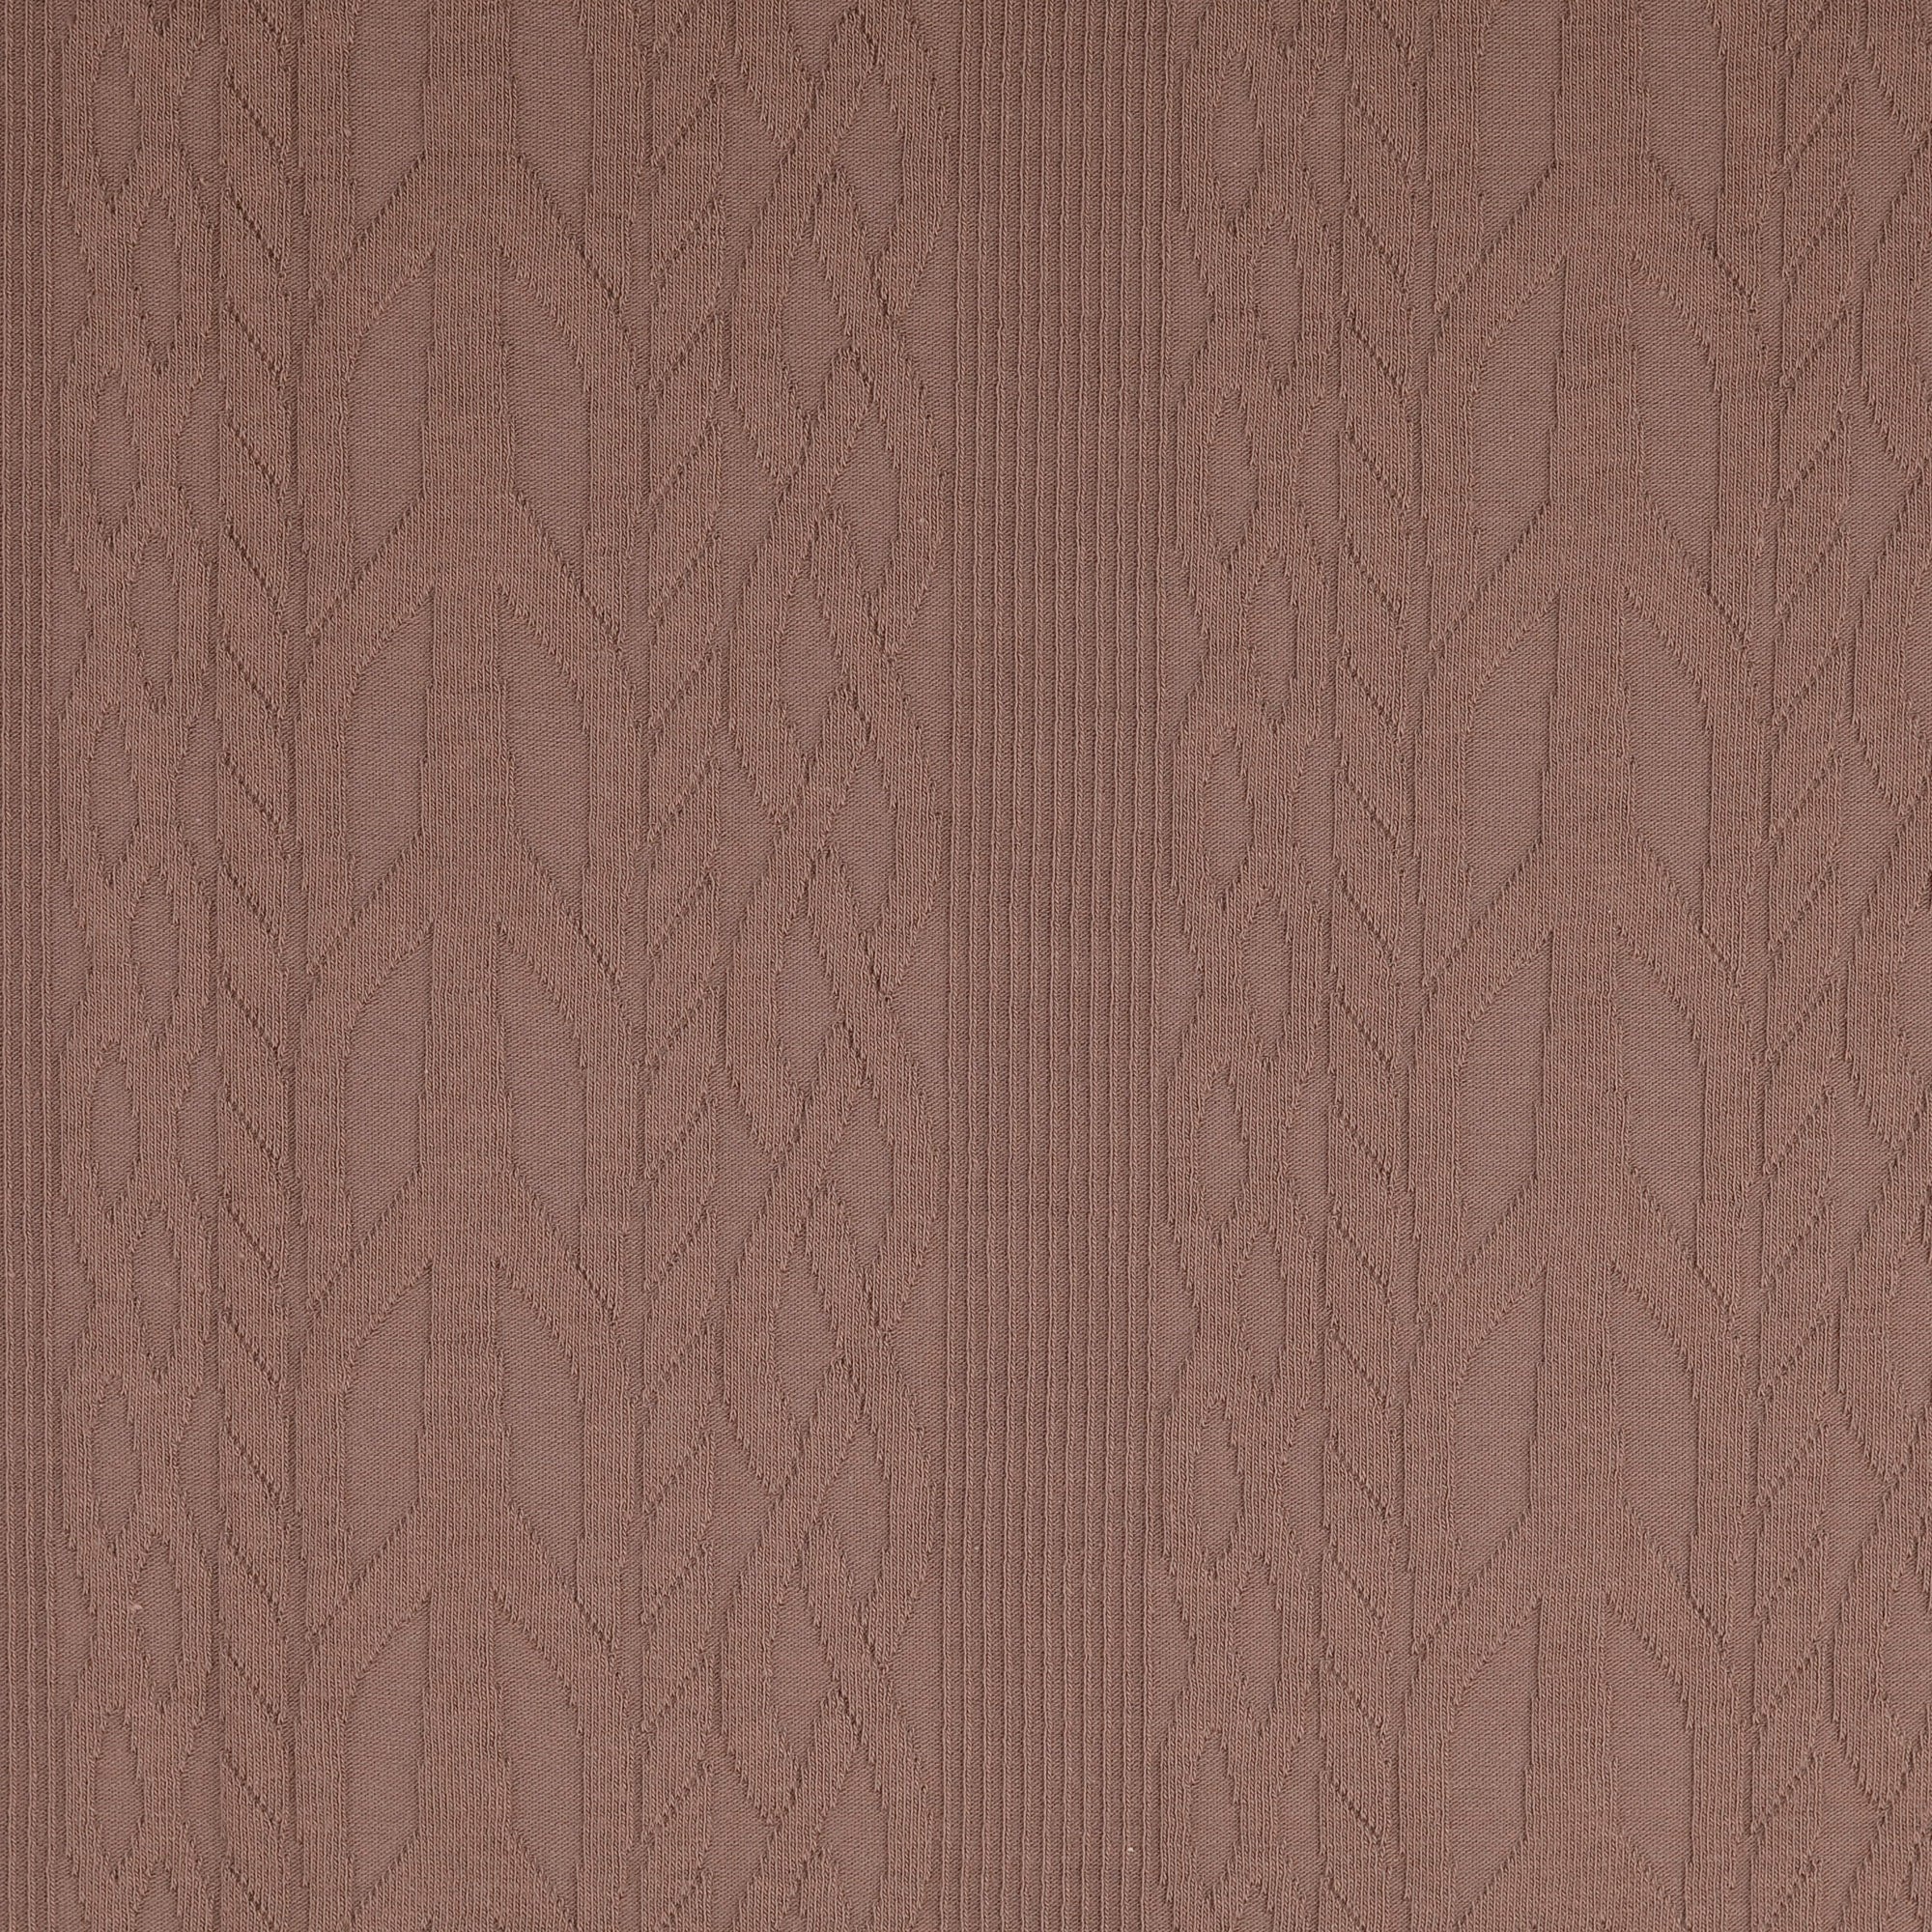 Cotton Cable Knit Fabric in Brown